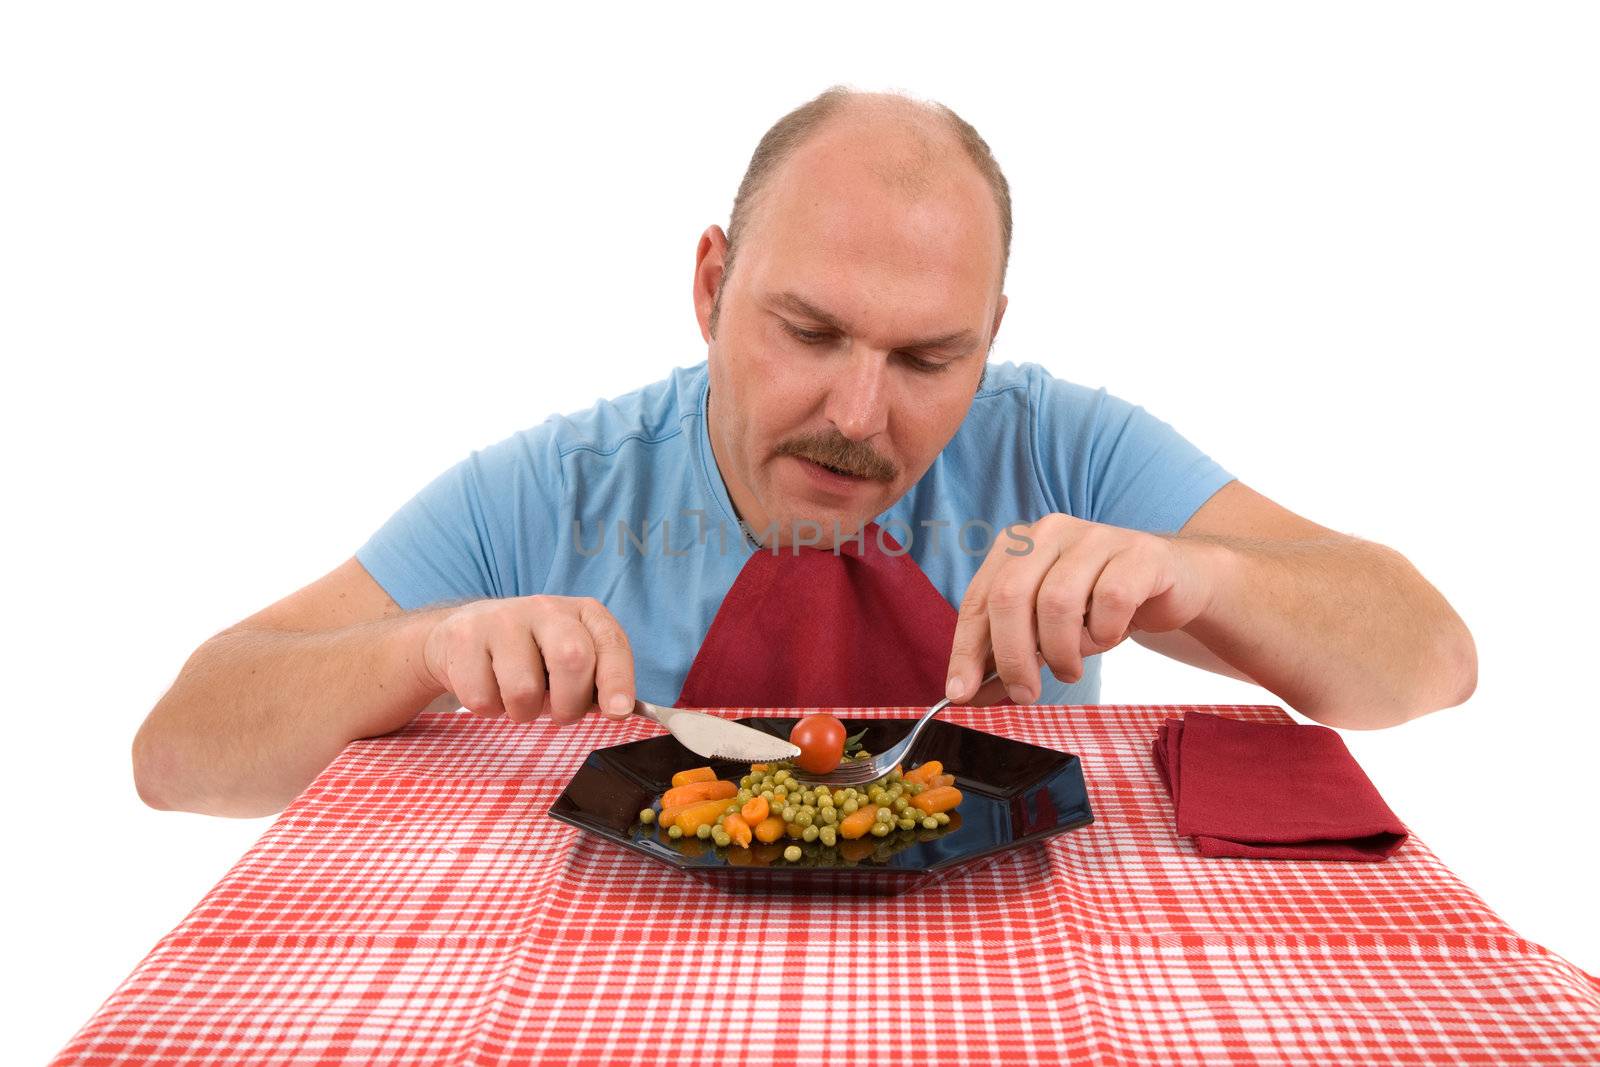 Mature adult eating healthy vegetables with an unhappy face